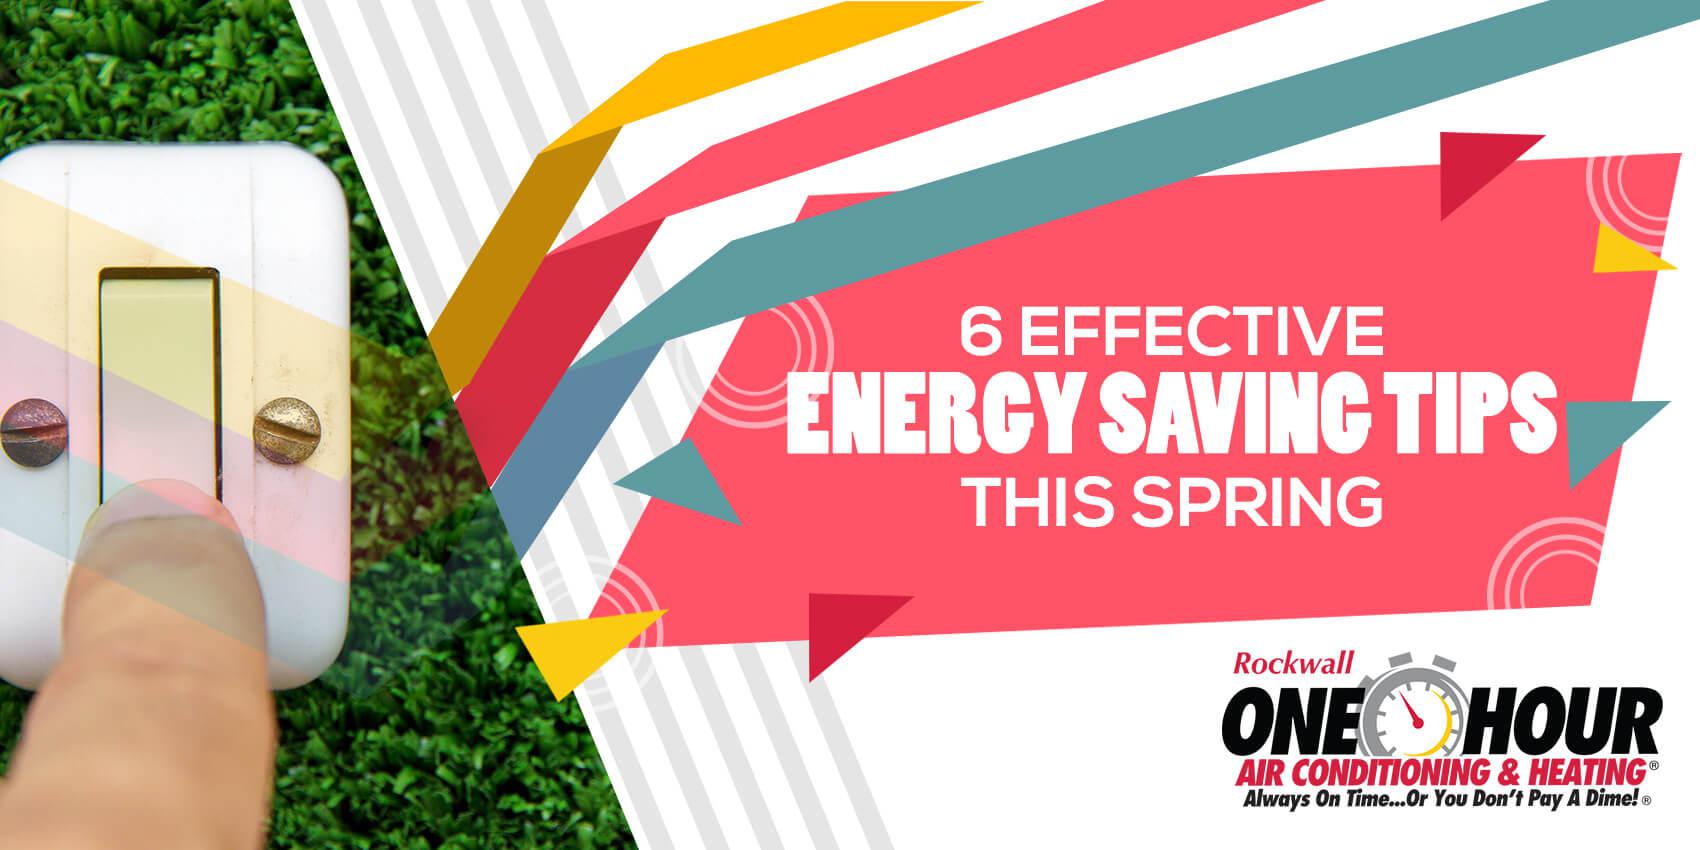 6 Effective Energy Saving Tips This Spring